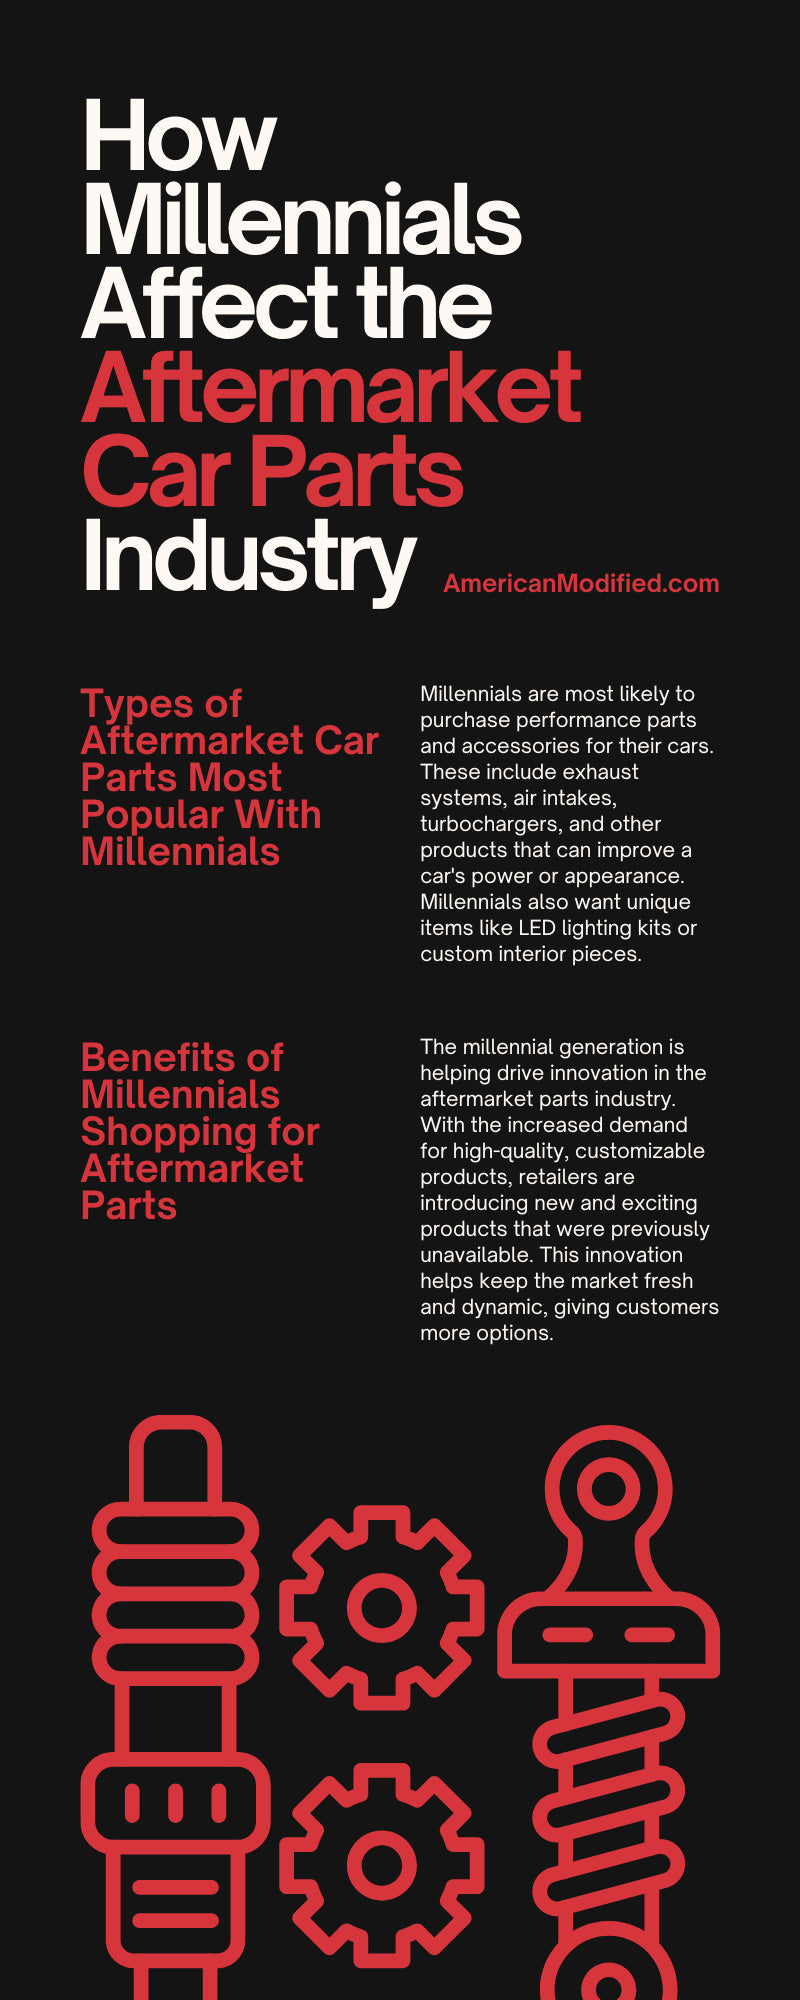 How Millennials Affect the Aftermarket Car Parts Industry